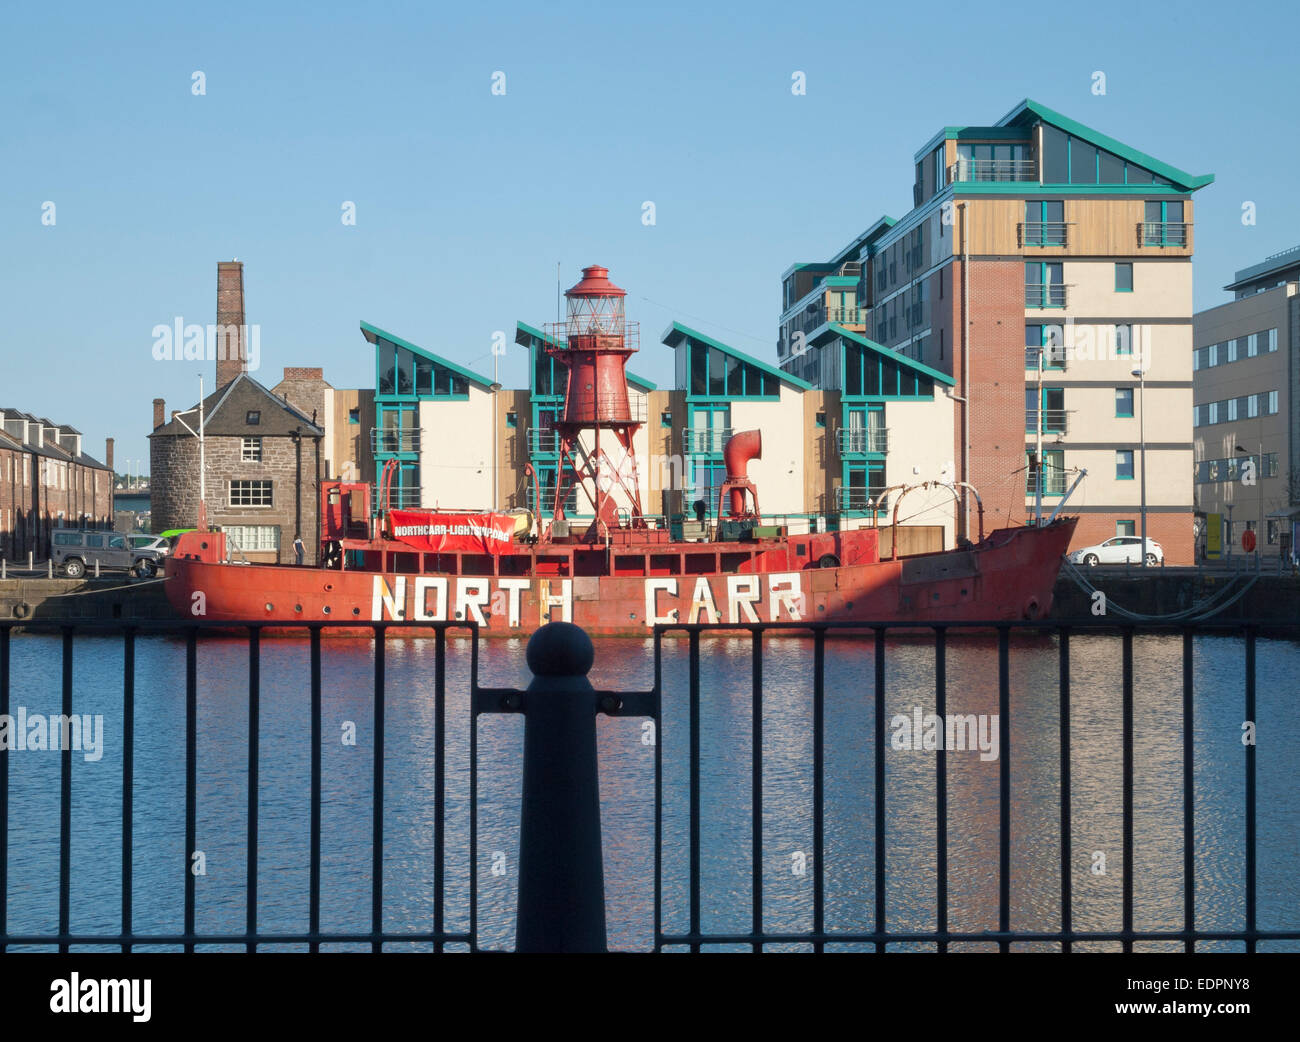 Nord carr lightship dock angus dundee ormeggiati Foto Stock